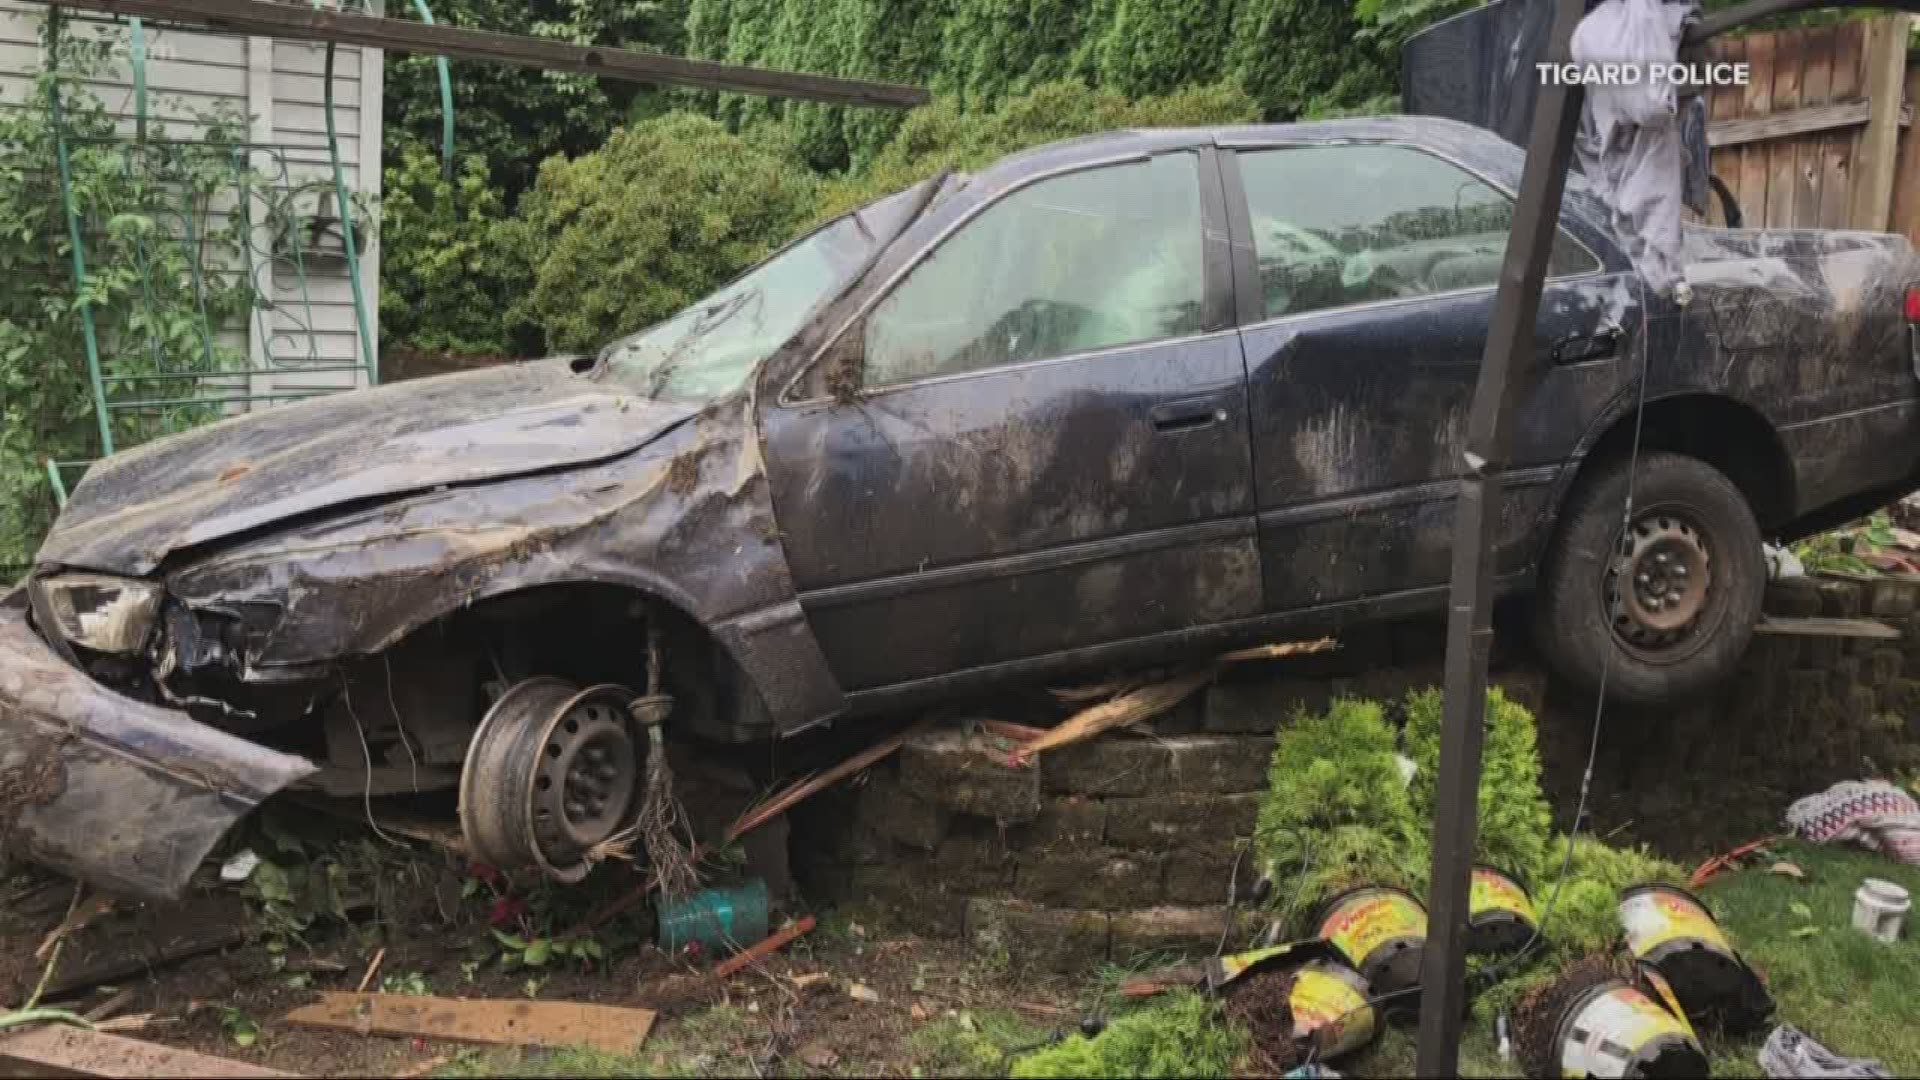 DUII driver crashes into Tigard homes